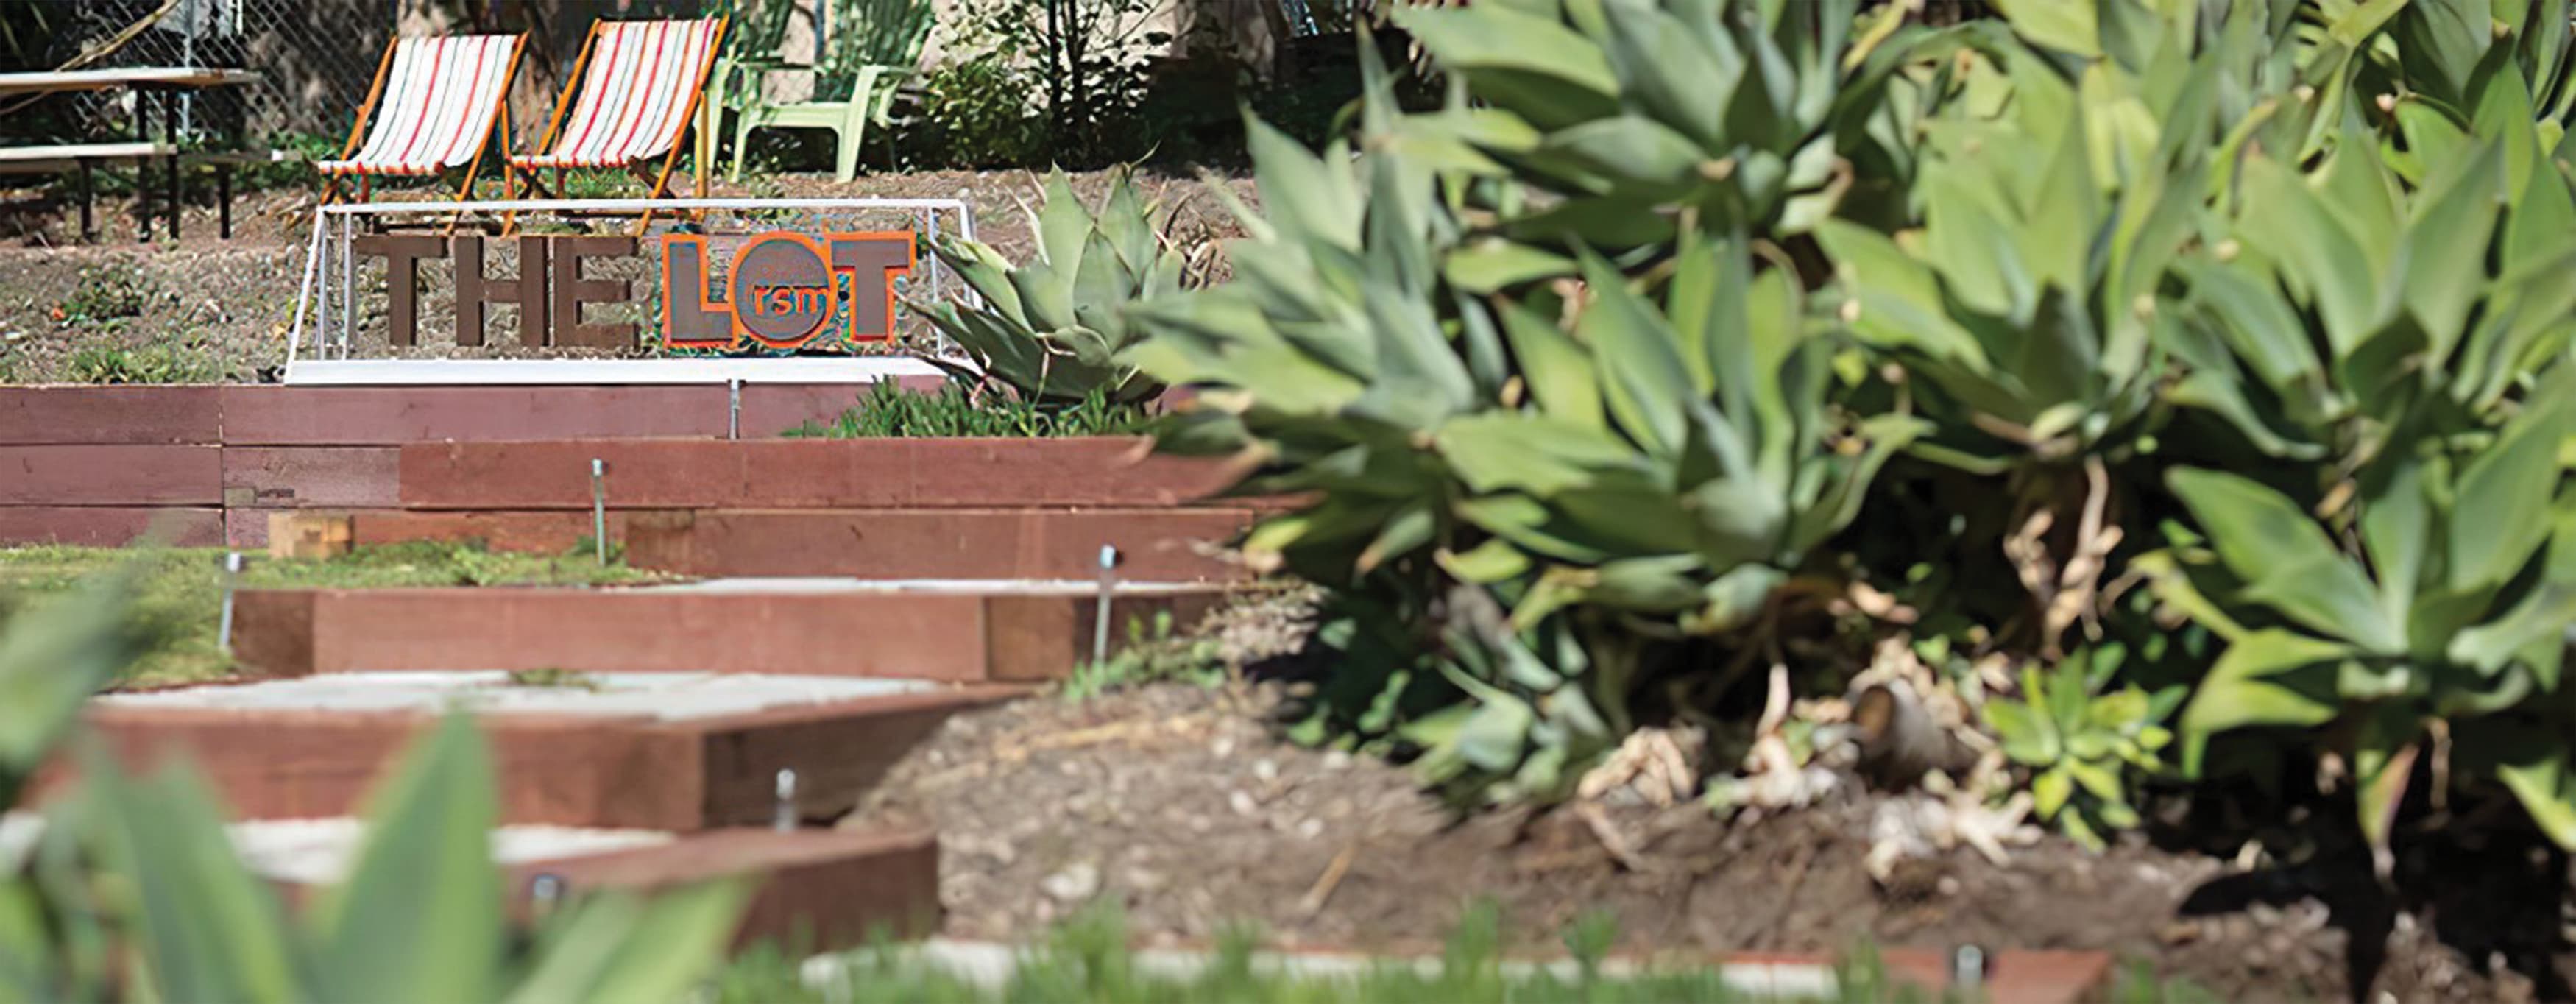 An outdoor space featuring a fabricated sign, seating, and succulent vegetation.